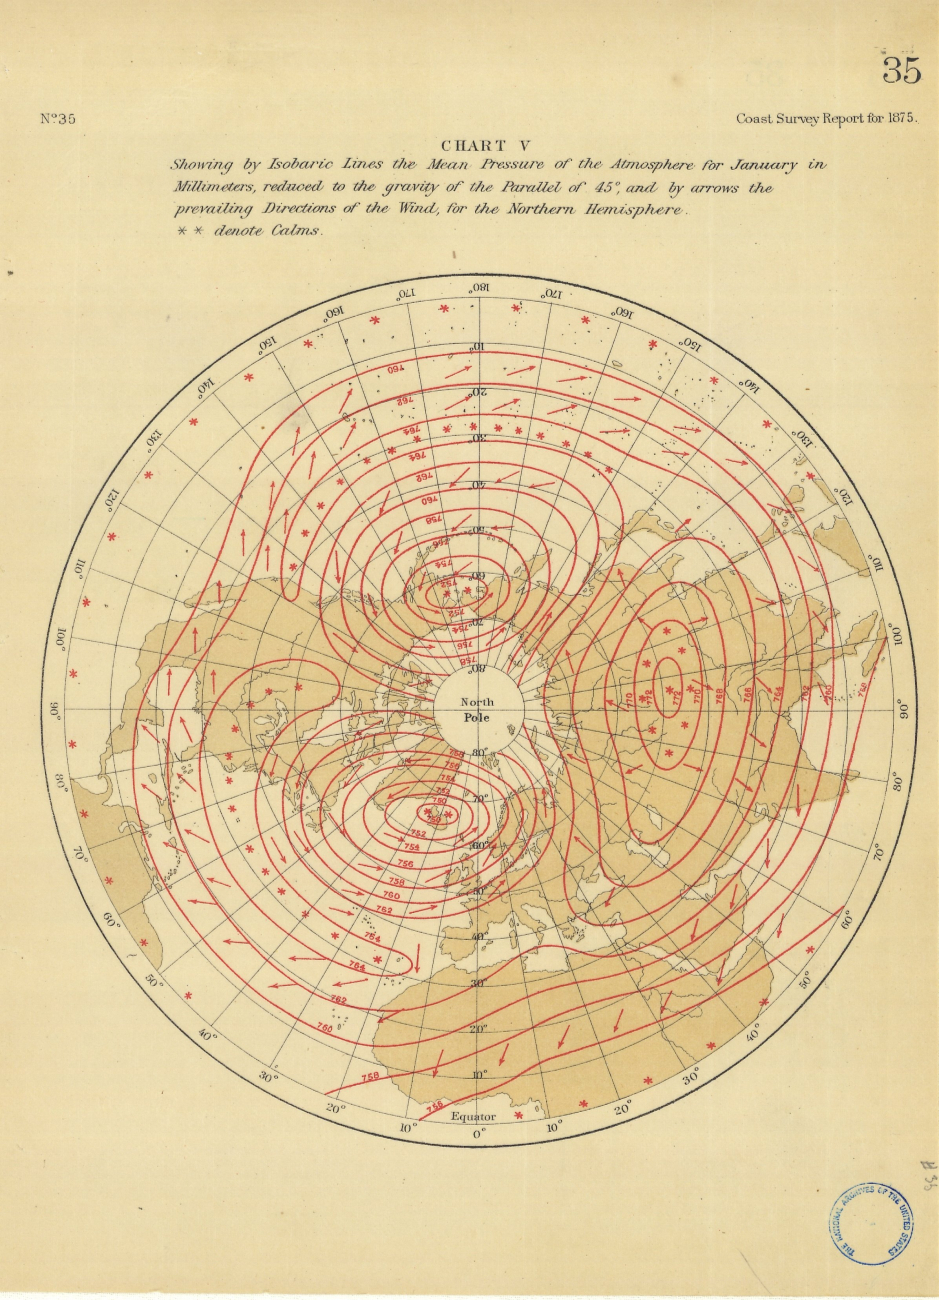 Map showing by isobaric lines the mean annual pressure of the atmosphere forJanuary in millimeters by William Ferrel